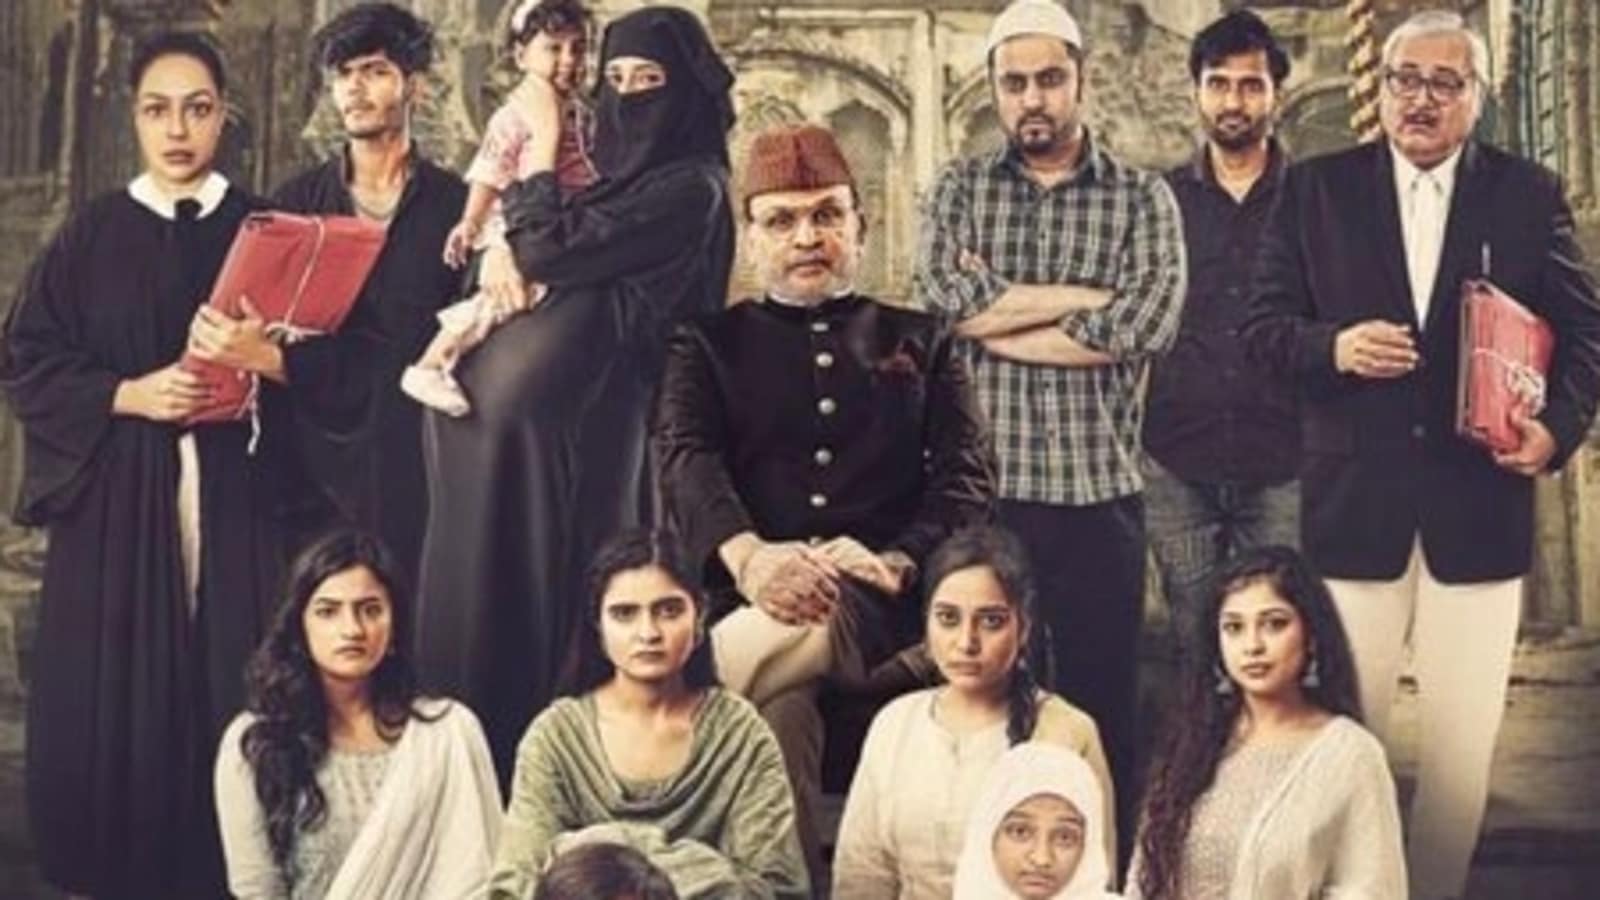 Annu Kapoor’s Hum Do Hamare Baarah ‘not targeting any community’: Director reacts to criticism